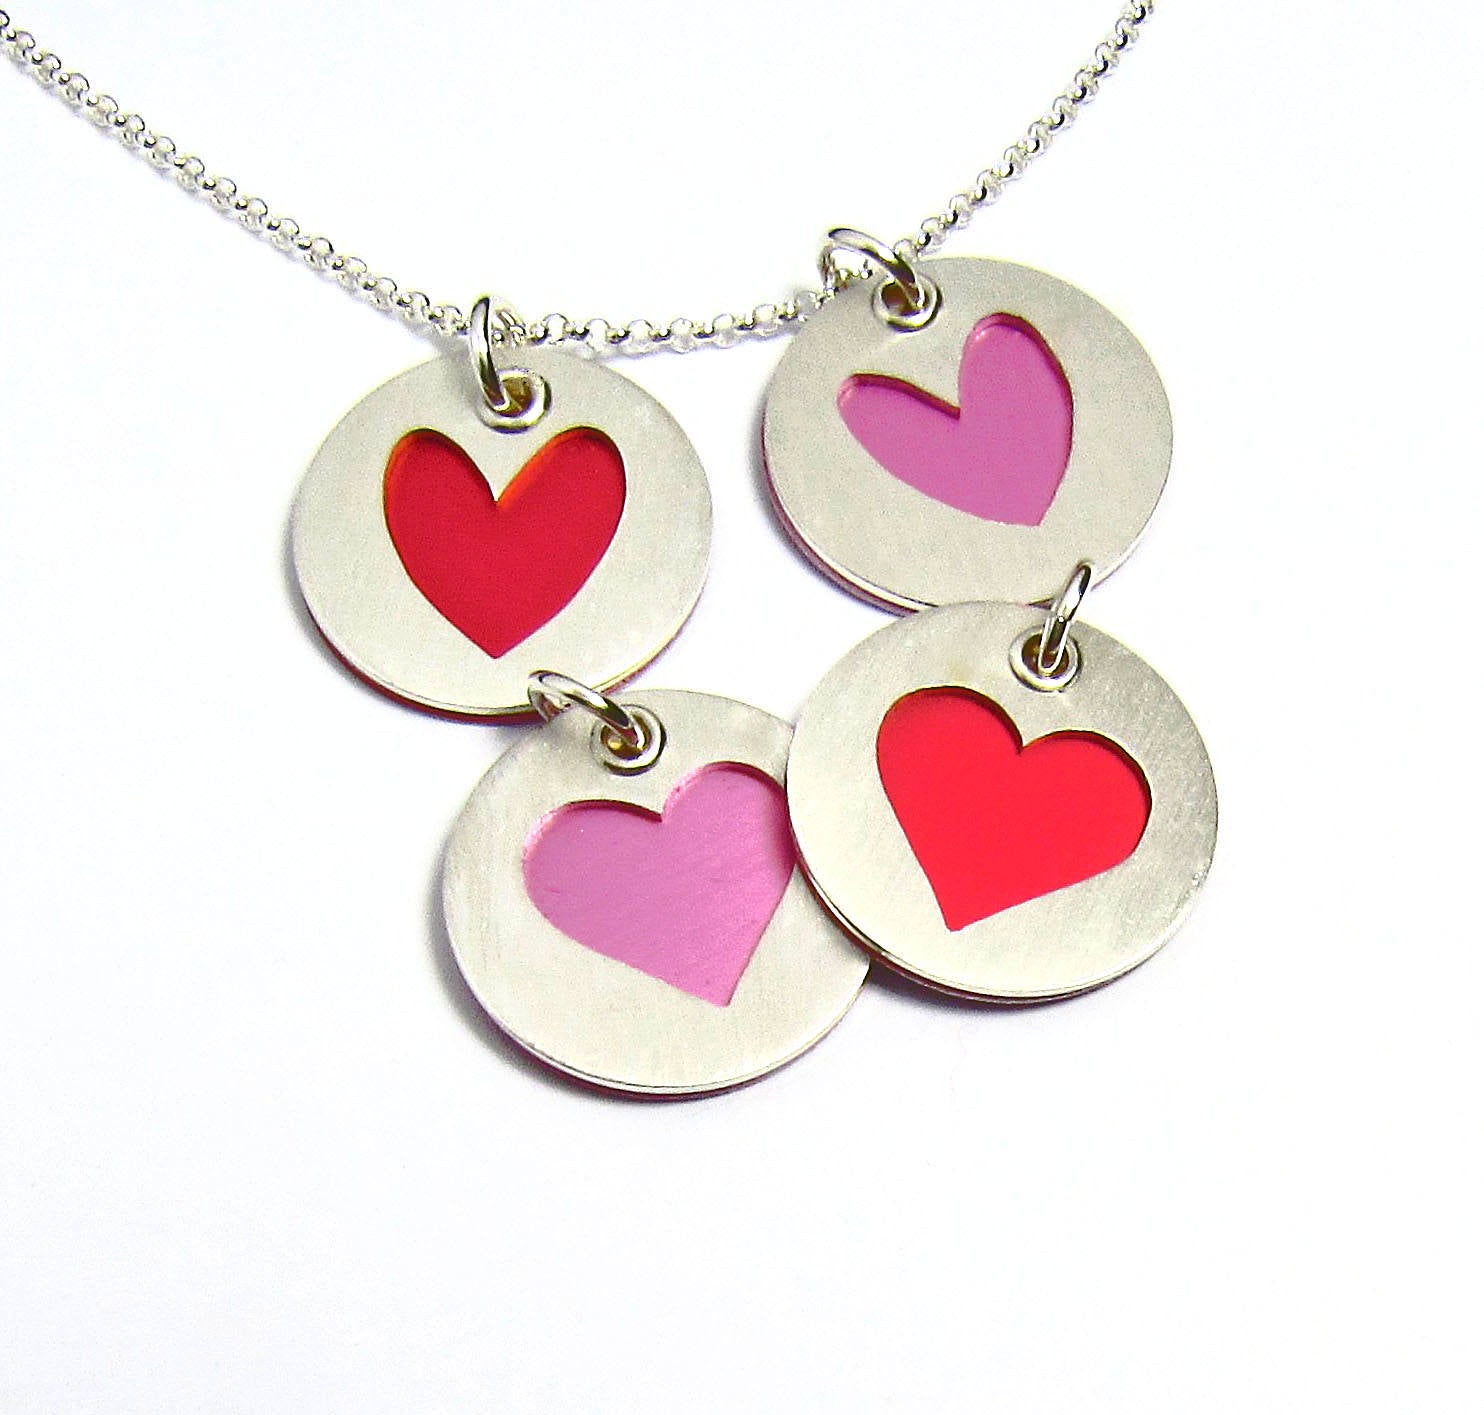 Collection of sterling silver heart charms for bracelets and necklaces. Shown in pink and red